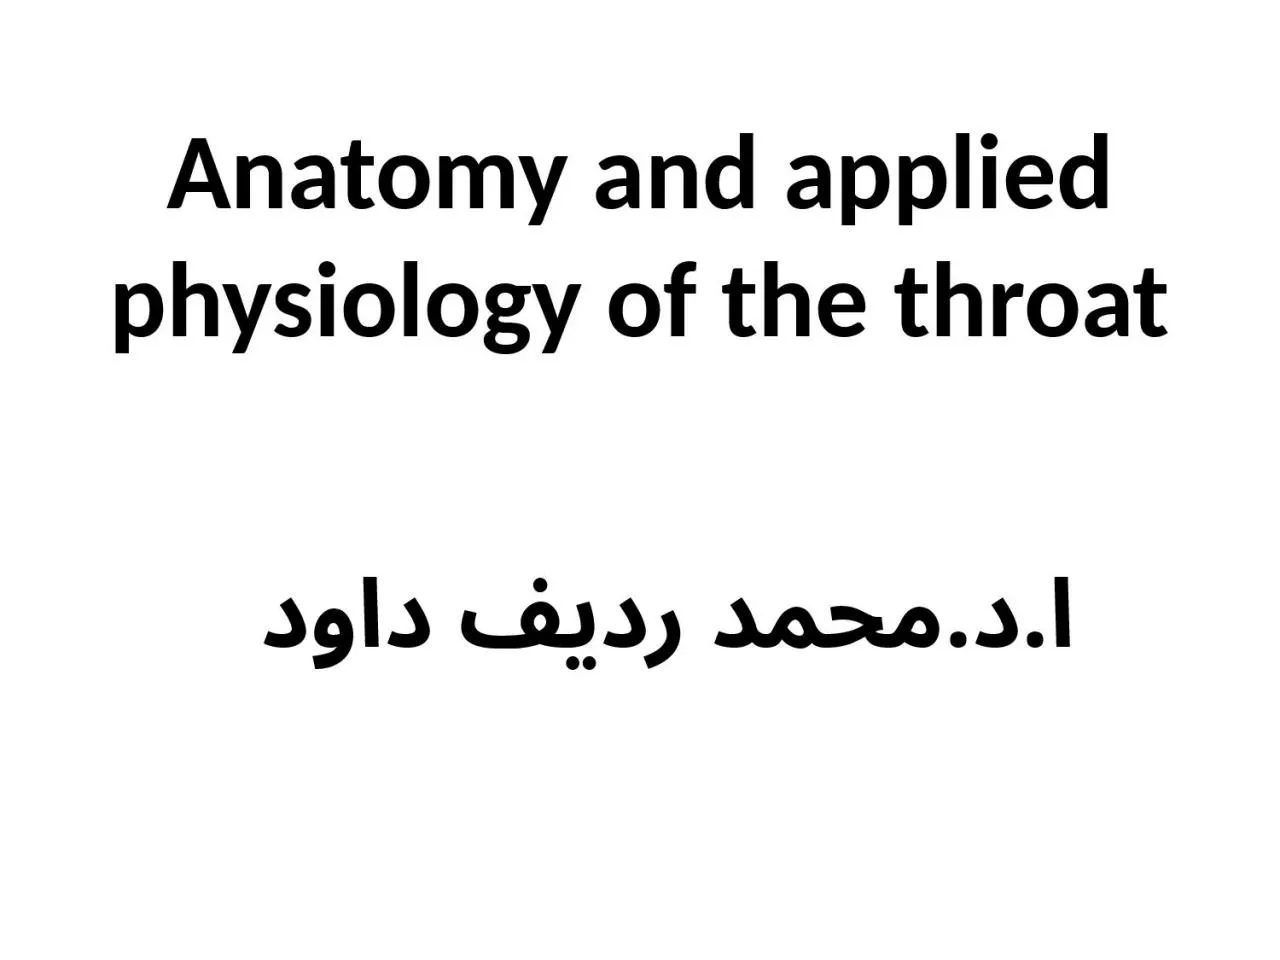 Anatomy and applied physiology of the throat